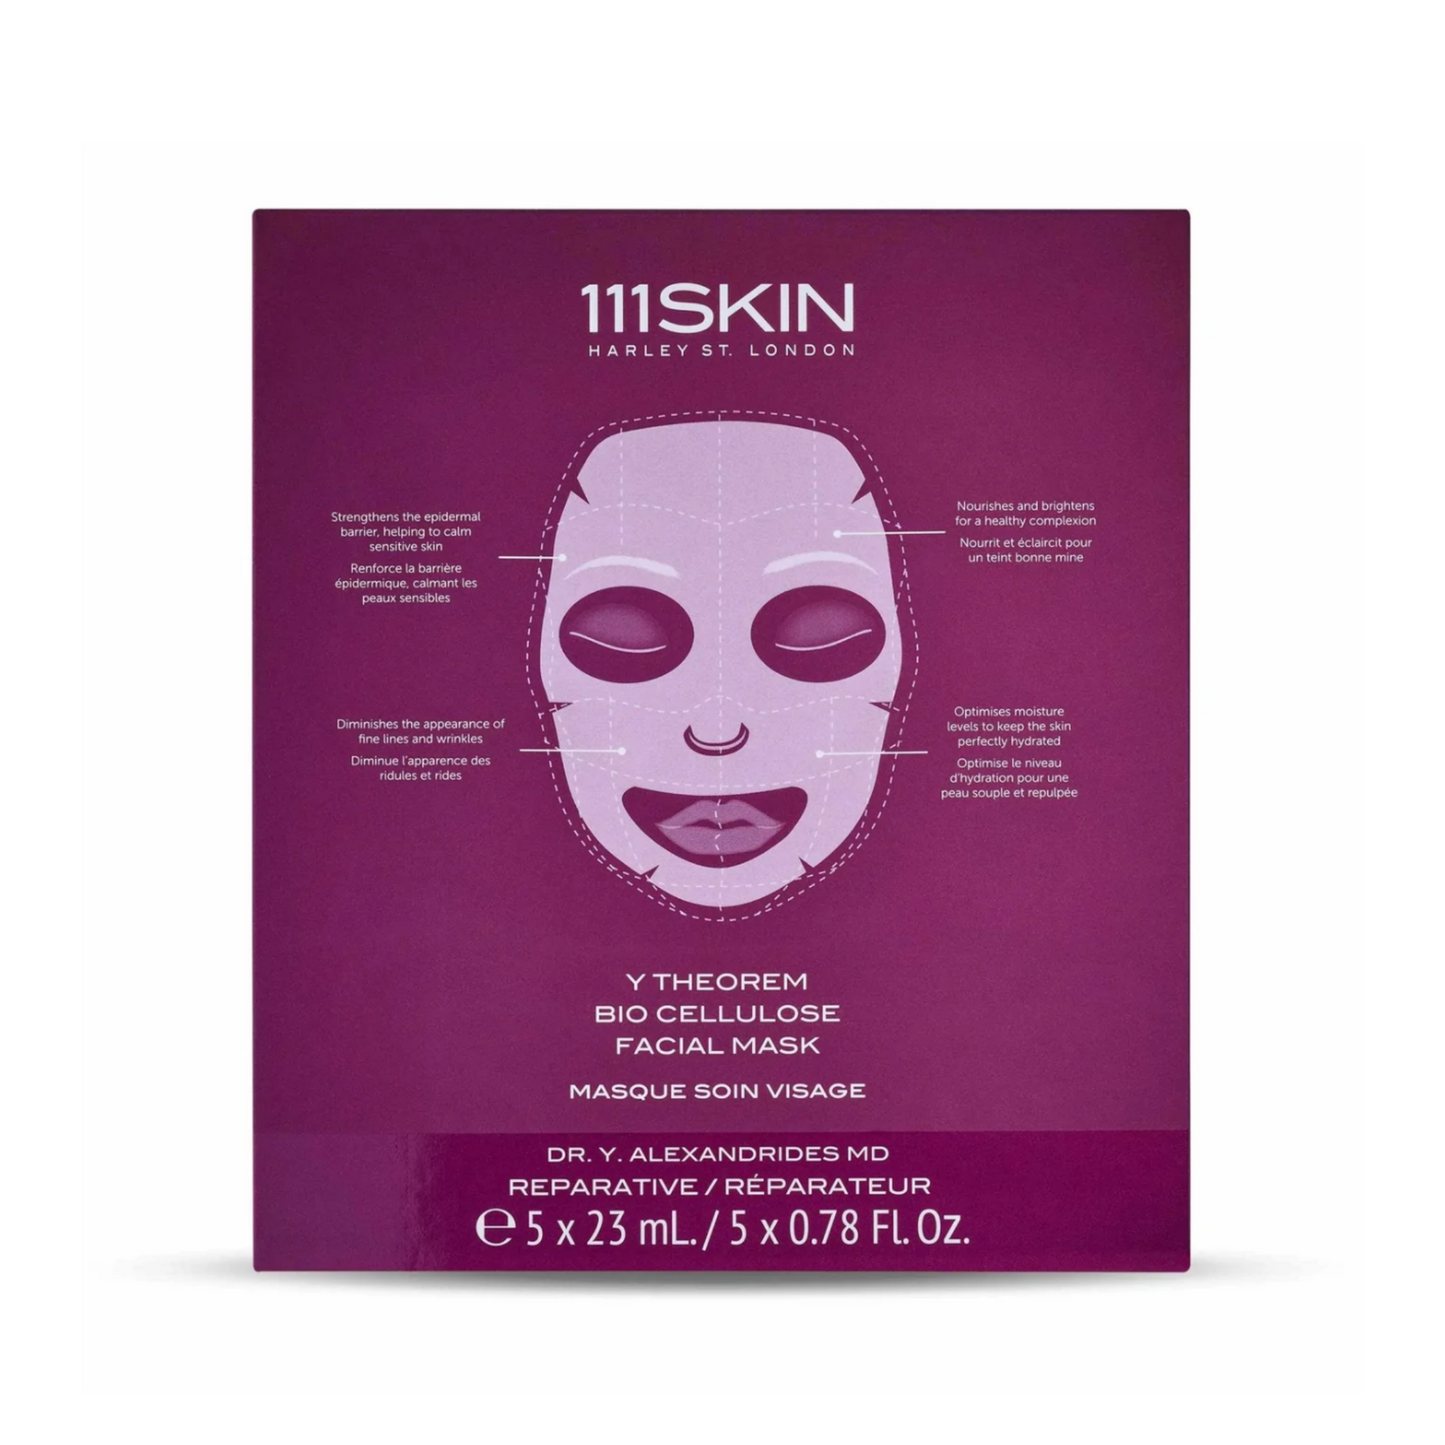 Y Theorem Bio Cellulose Facial Mask: Calming Mask for Stressed Skin